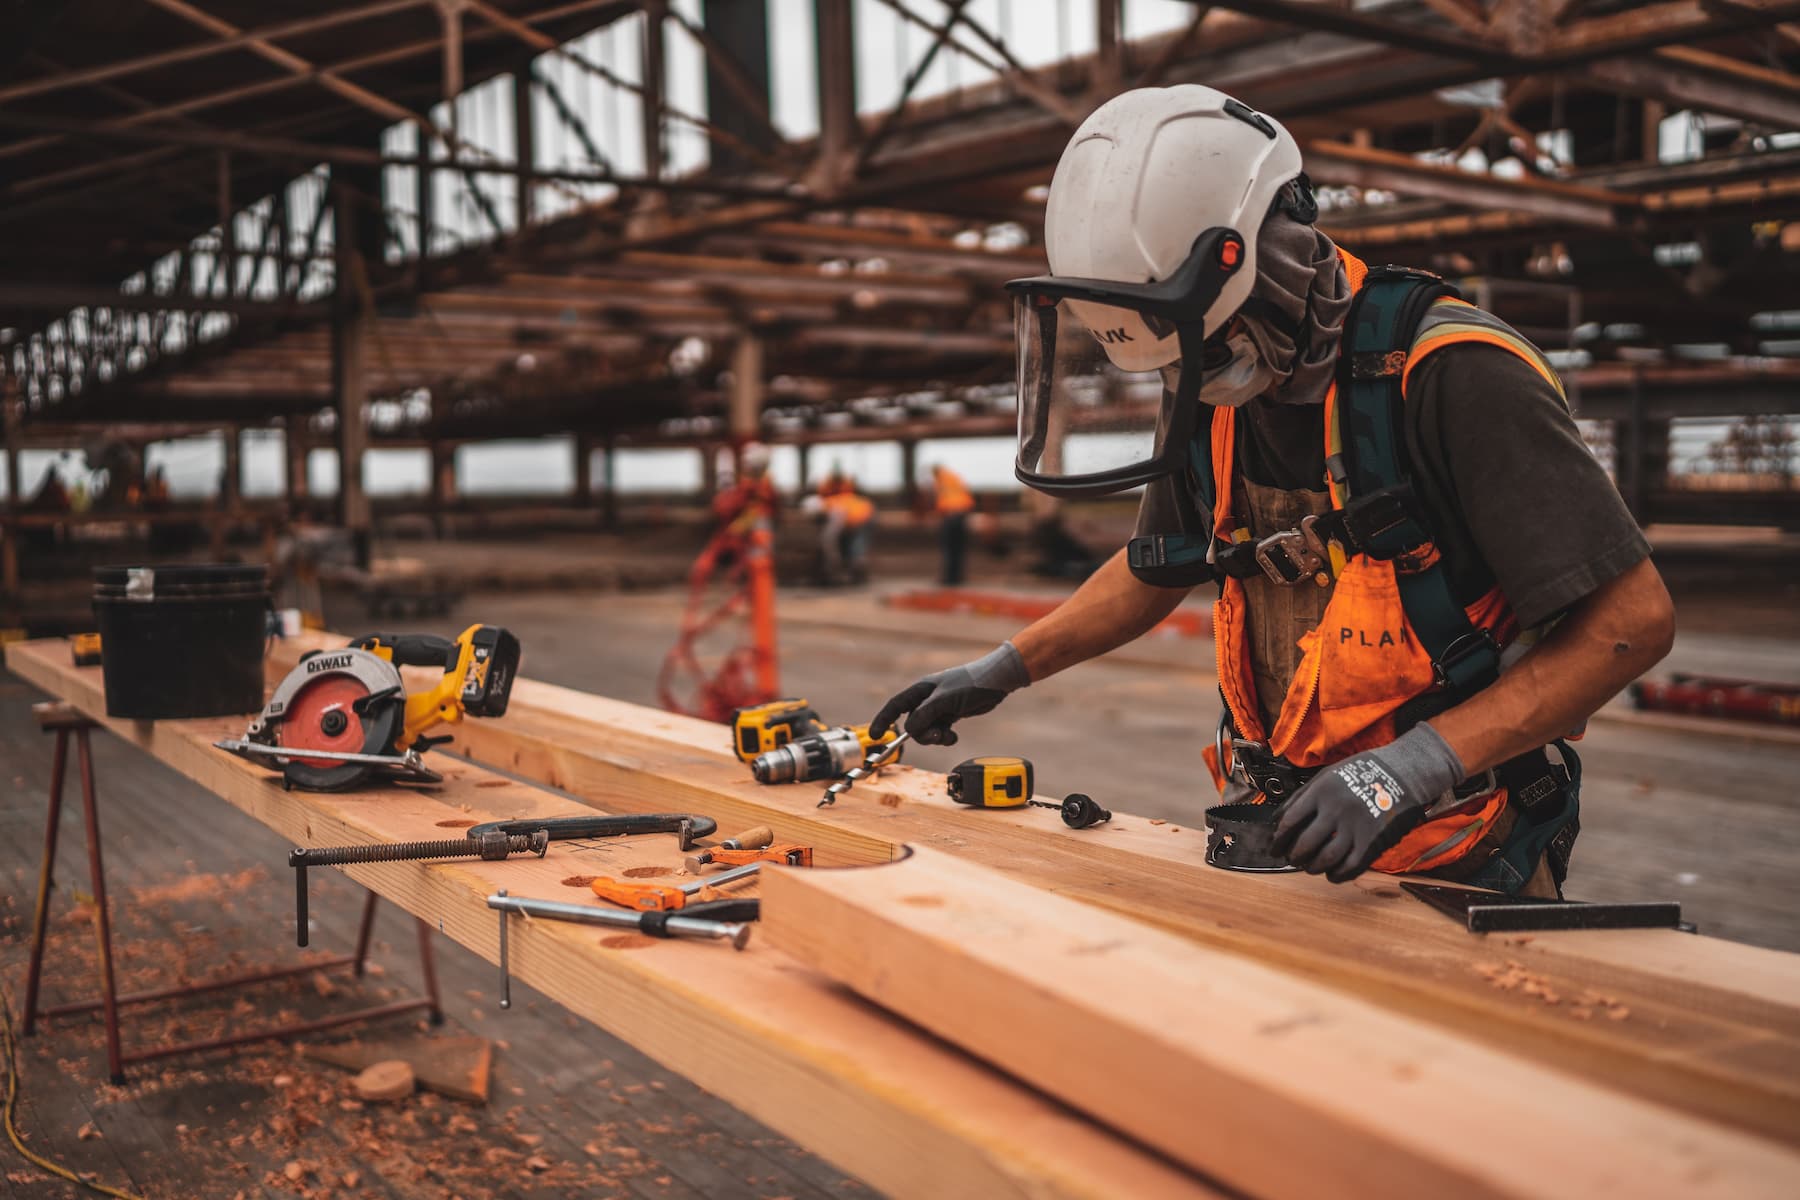 A man using power tools on some timber, wearing full PPE.